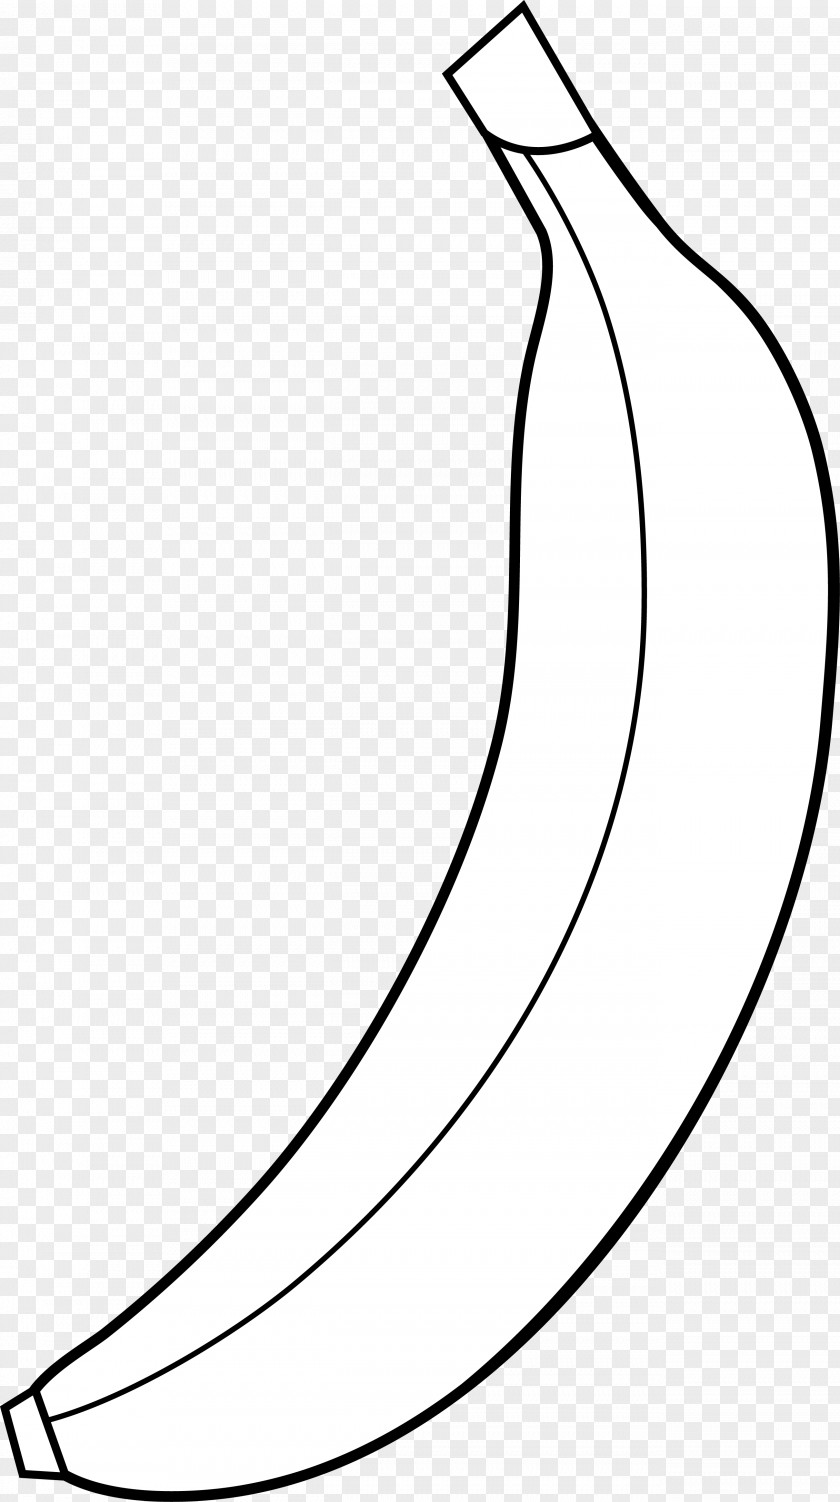 Banana Outline Cliparts Muffin Black Clip Art PNG